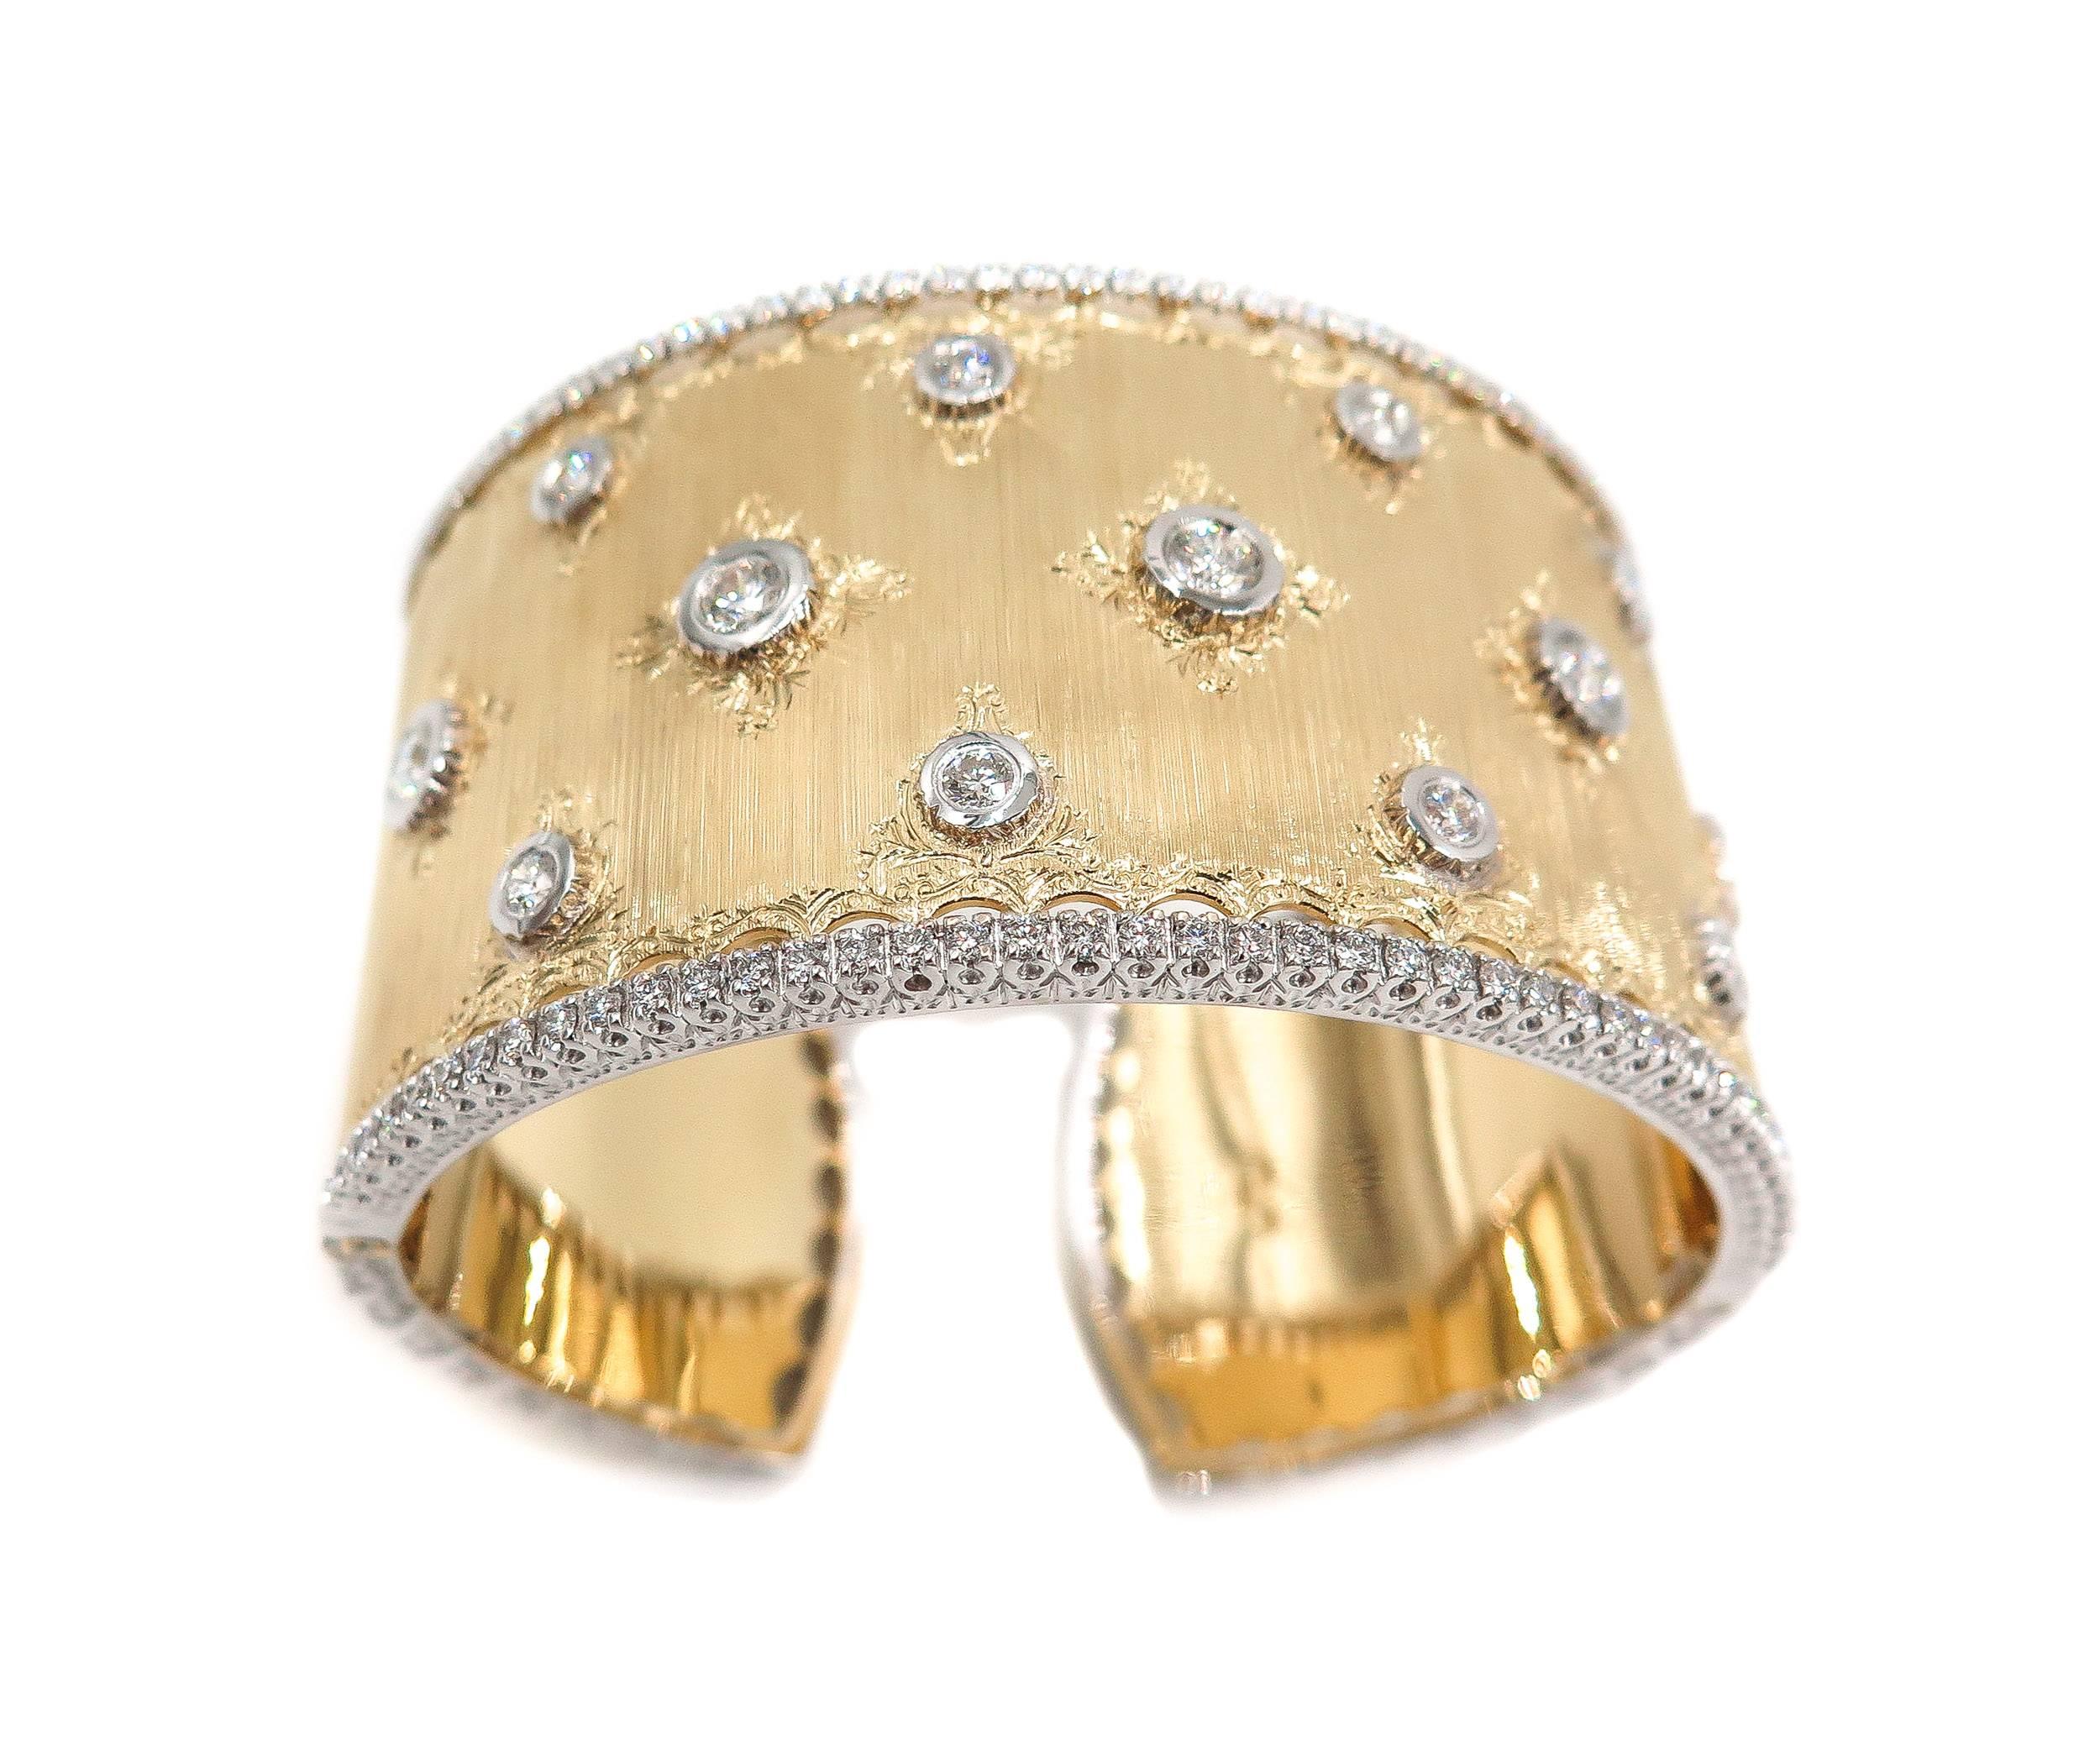 This beautiful cuff-bangle bracelet exemplifies the exquisite Italian craftsmanship with an enchanting design, florentine finish and whimsical engraved flower motif. 
This fabulous bracelet is adorned with 13 round brilliant cut diamonds bezel set